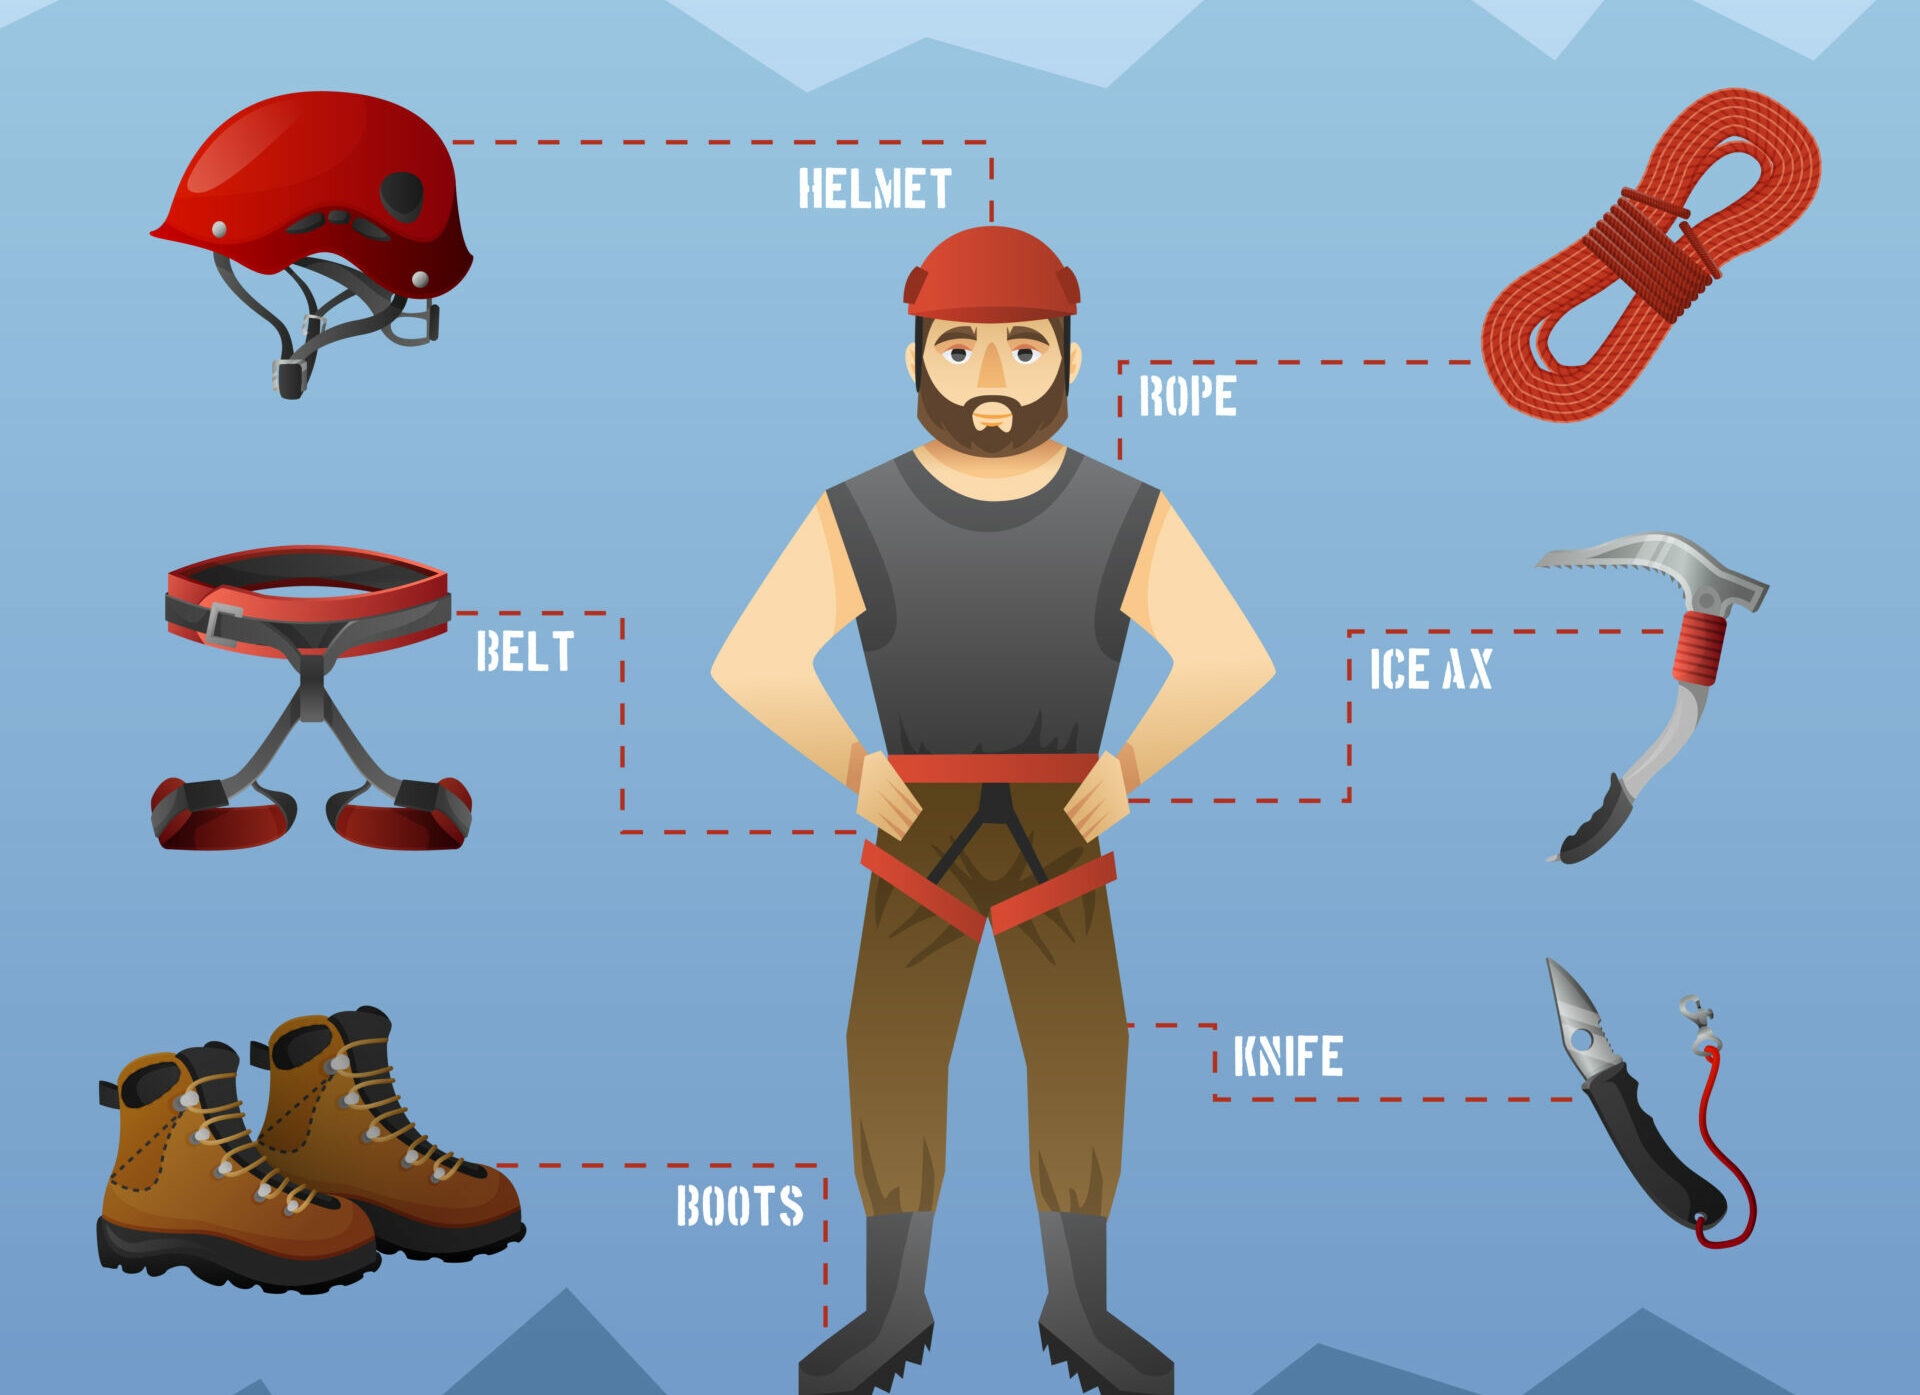 An illustrated guide showing the steps to set up a rappel anchor using a pre-existing bolt or anchor point, emphasizing the importance of proper knot tying and safety checks.